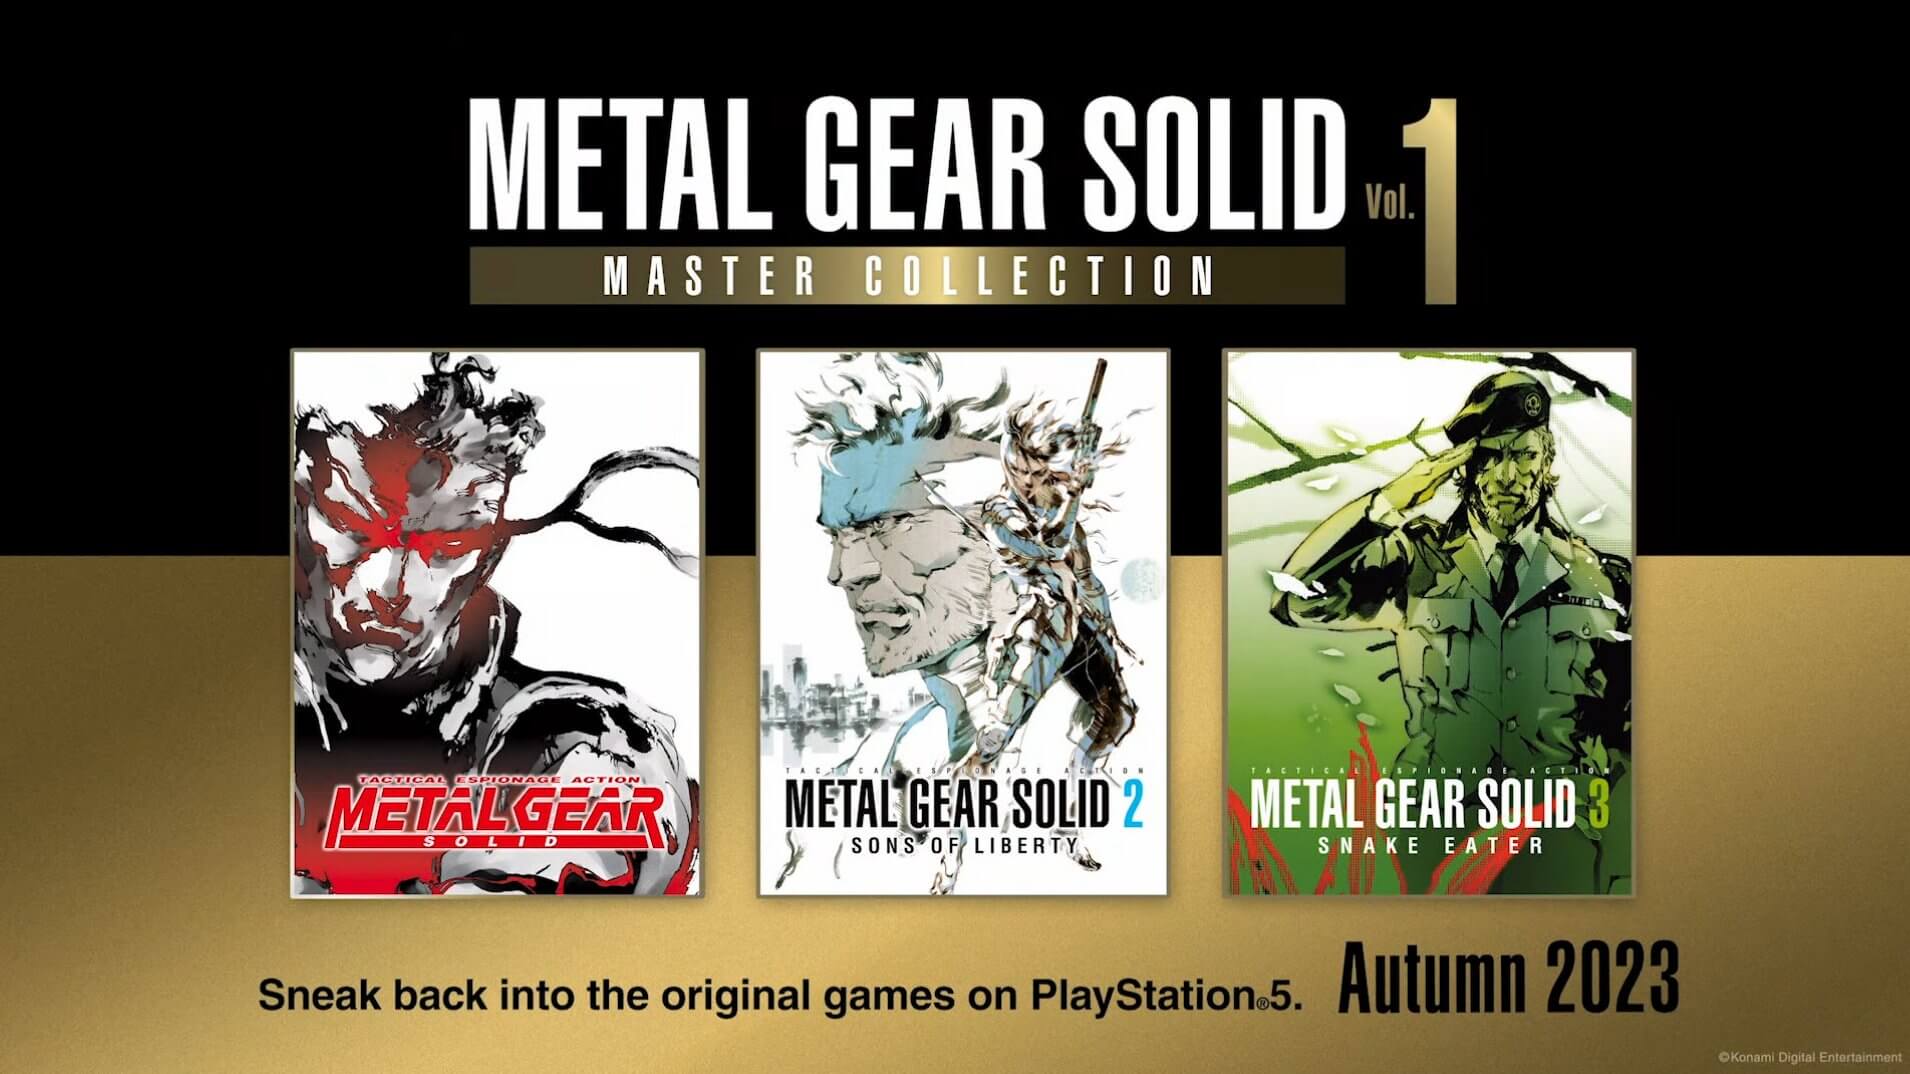 Metal Gear Solid Master Collection making up of Metal GEar Solid 1, 2, and 3